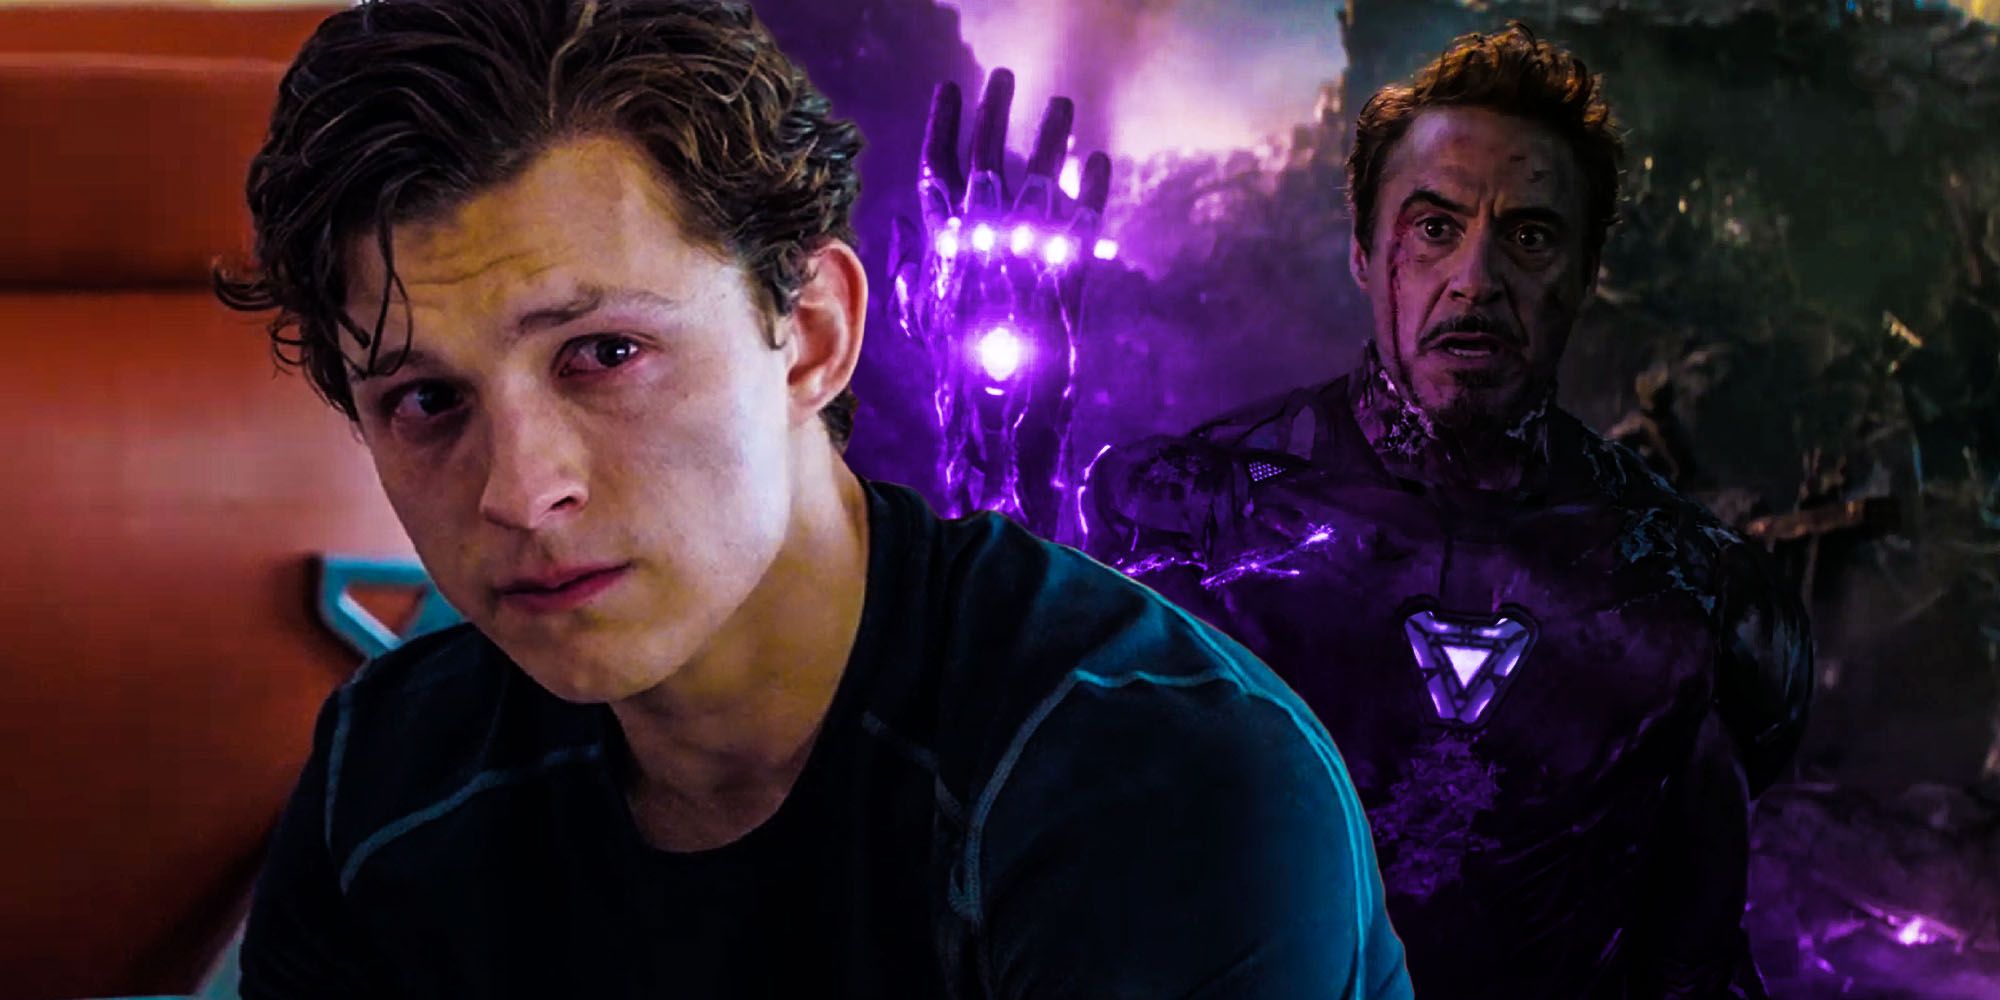 Why Iron Mans Death Accidentally Ruined Peter Parker’s Life